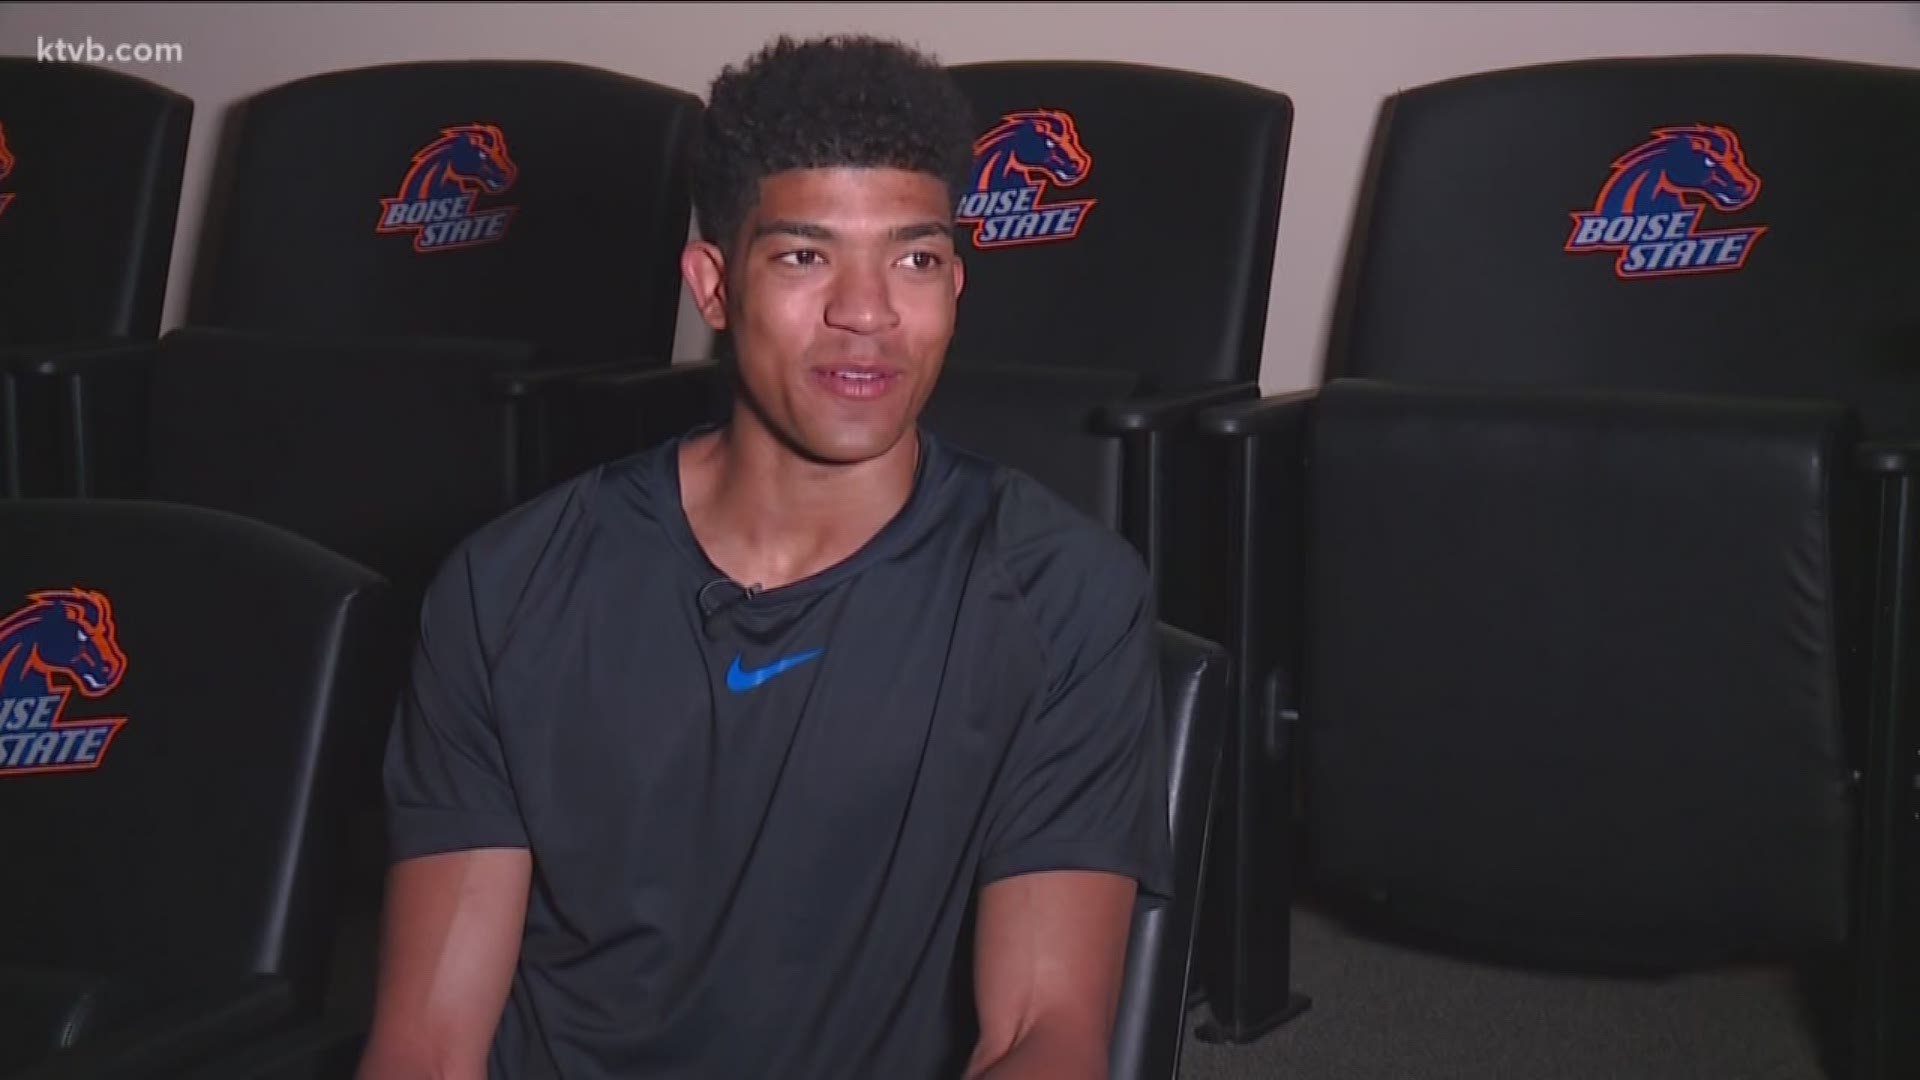 Chandler Hutchison has walked across the stage at Taco Bell Arena to accept his college diploma, but now he's ready to walk across a different stage."A lot of that is because of the work that I put in and the sacrifices that I made."